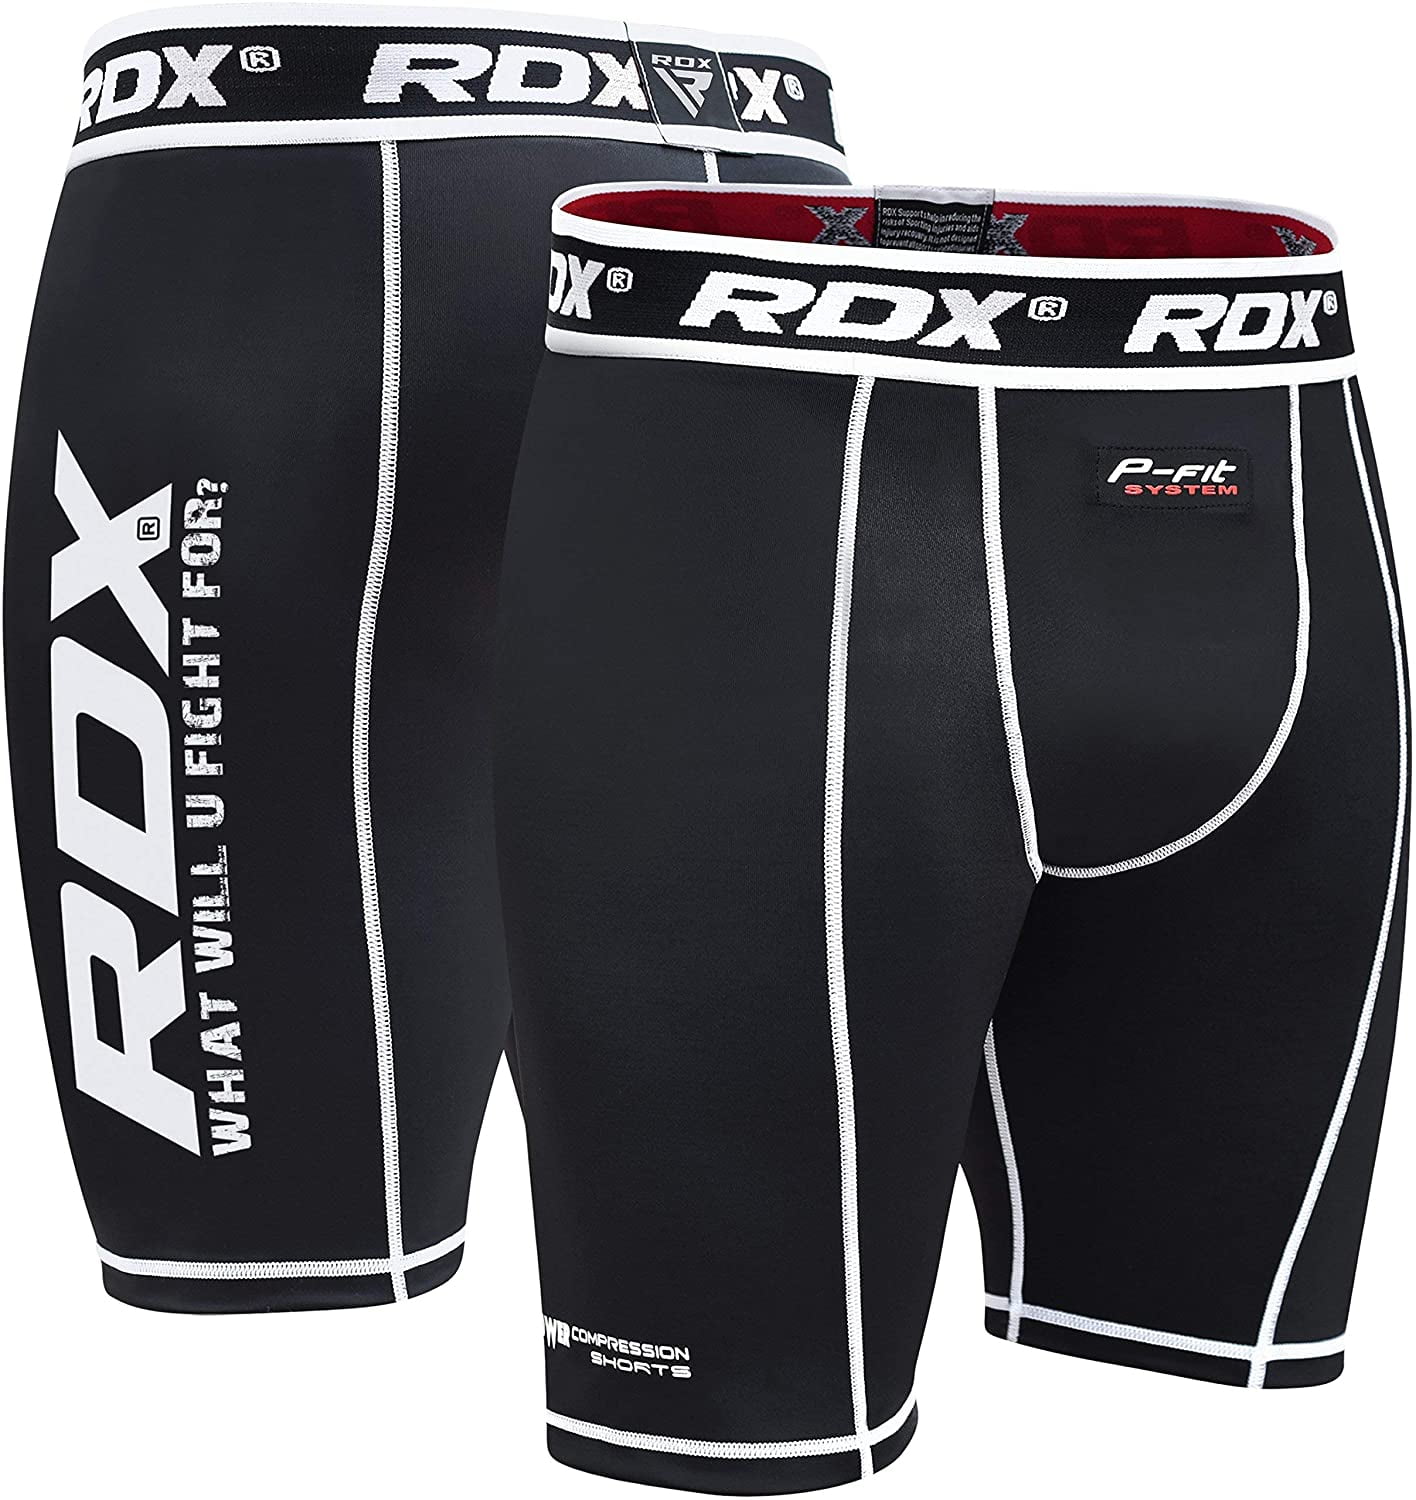 RDX MMA Mens Thermal Compression Shorts Groin Cup Boxing Training Guard Base Layer Fitness Running Exercise 